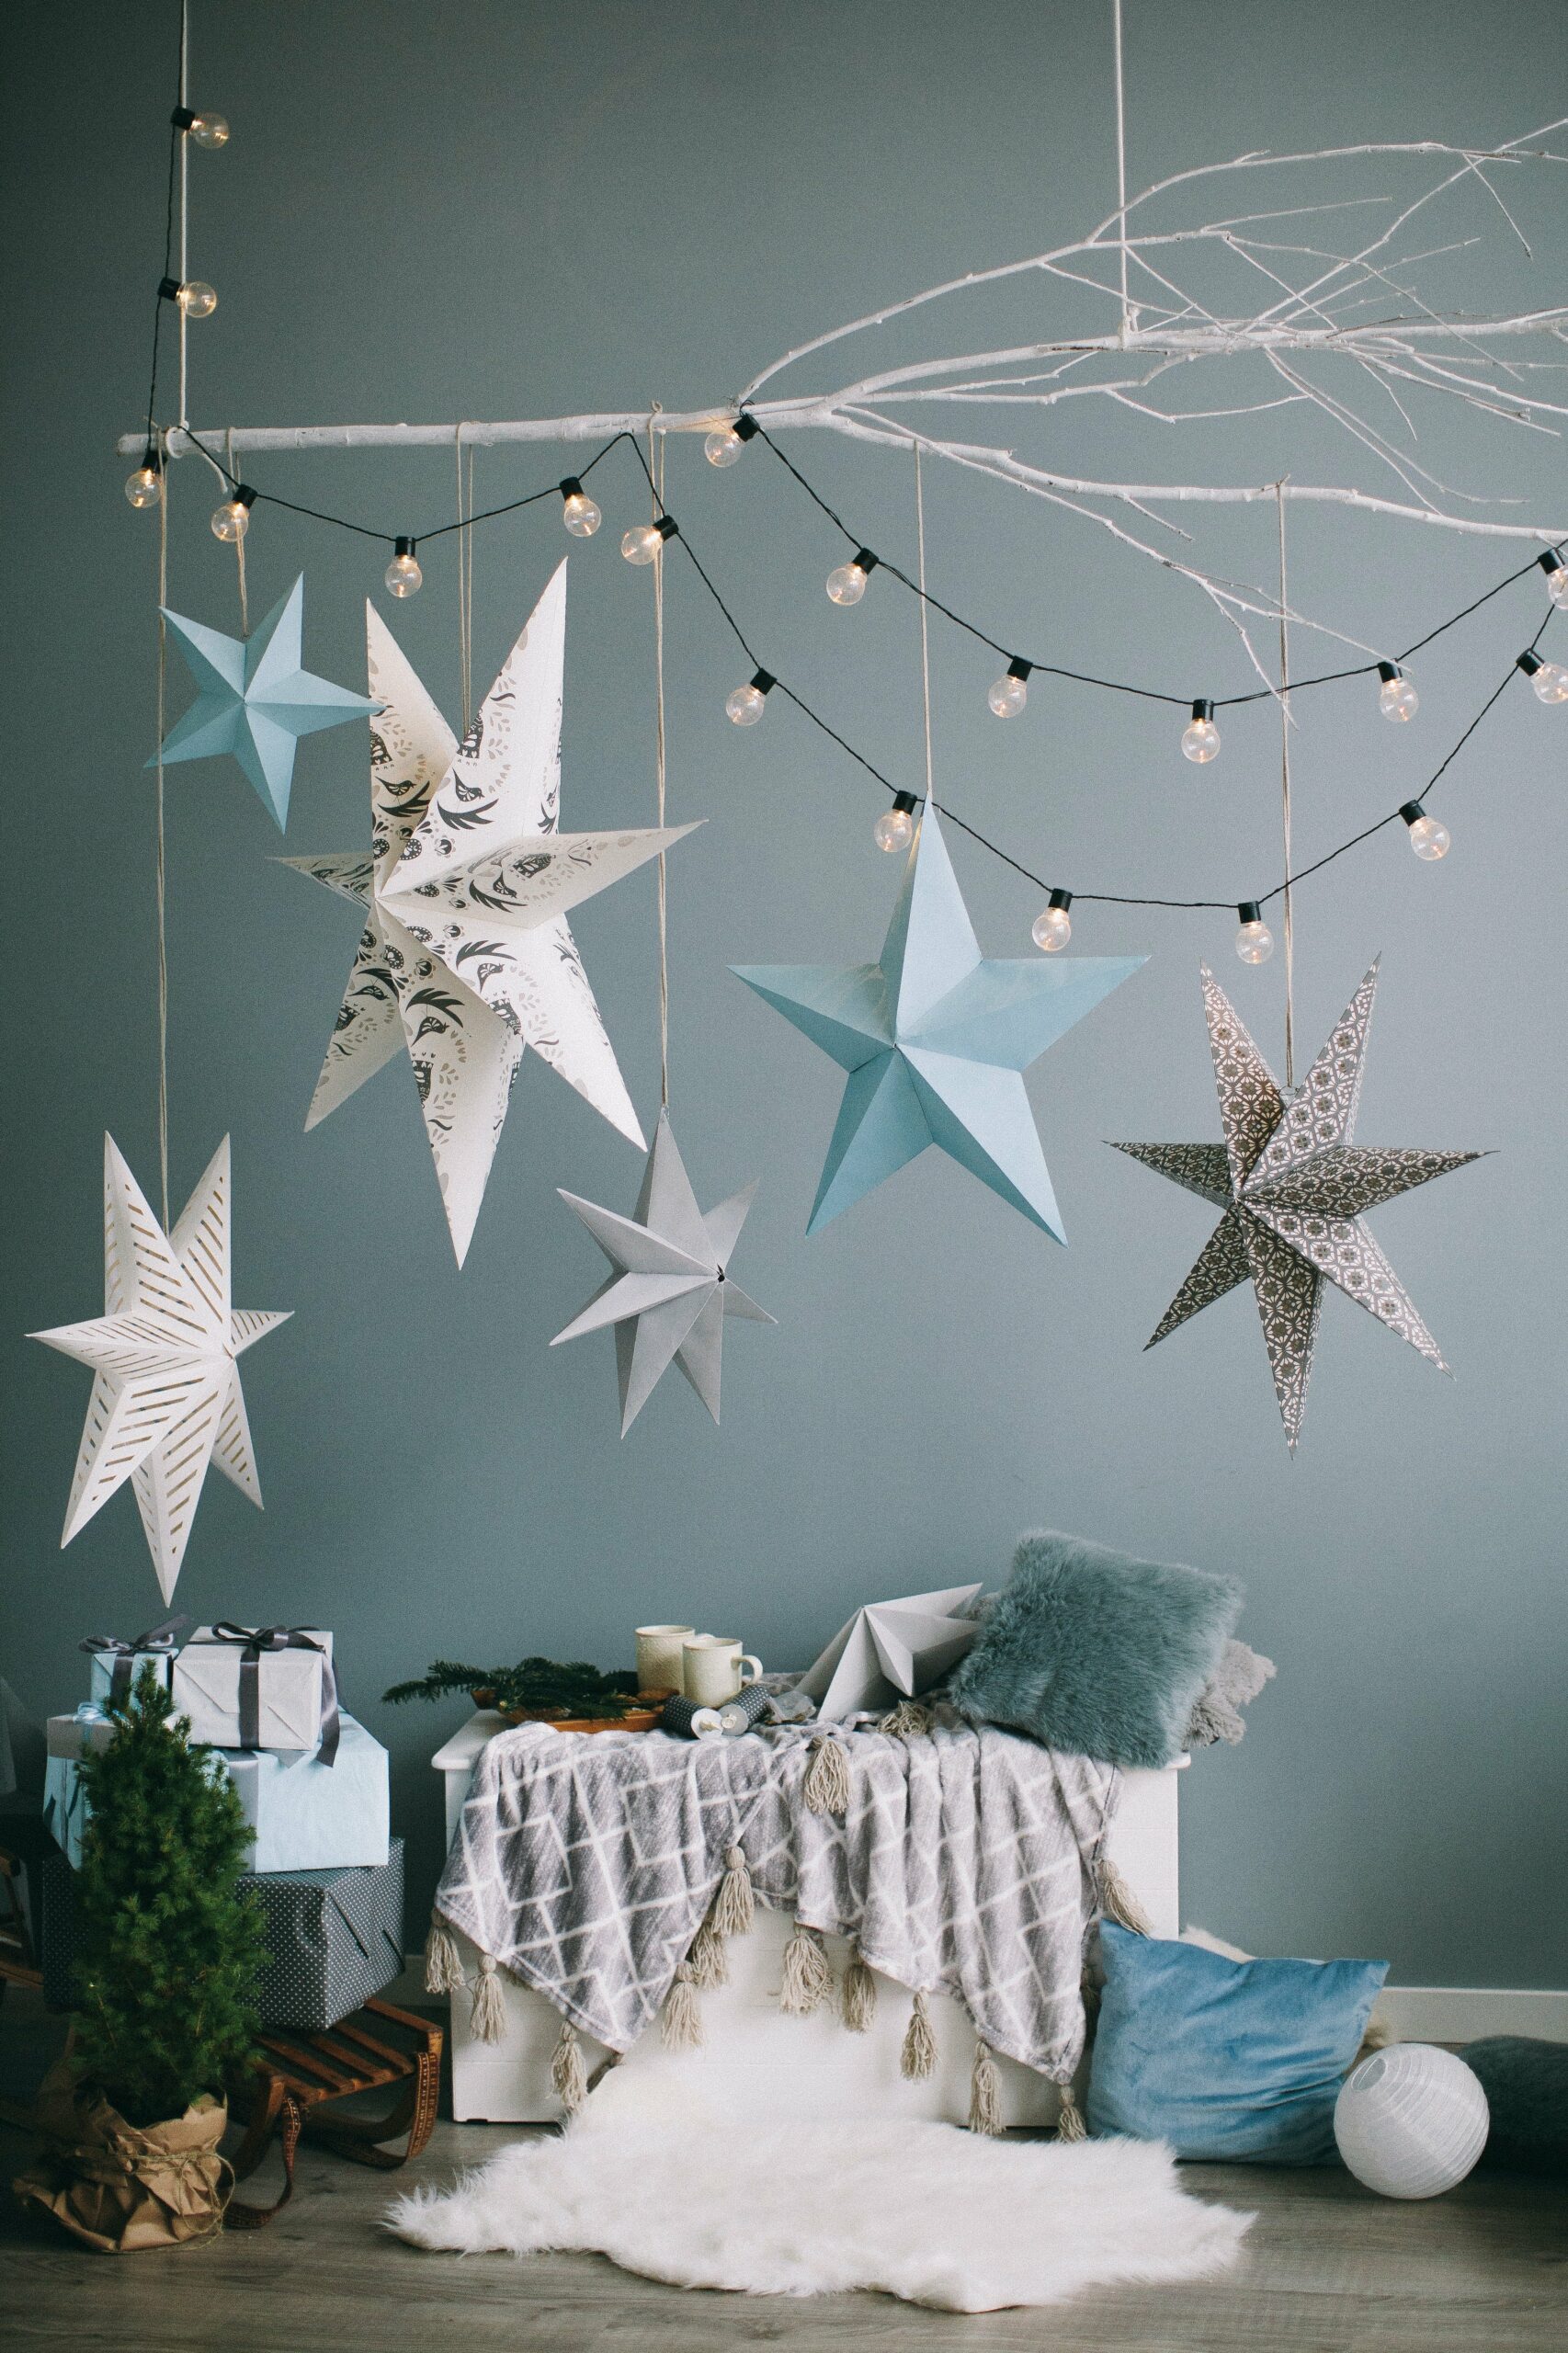 How to have a stylish yet functional Christmas